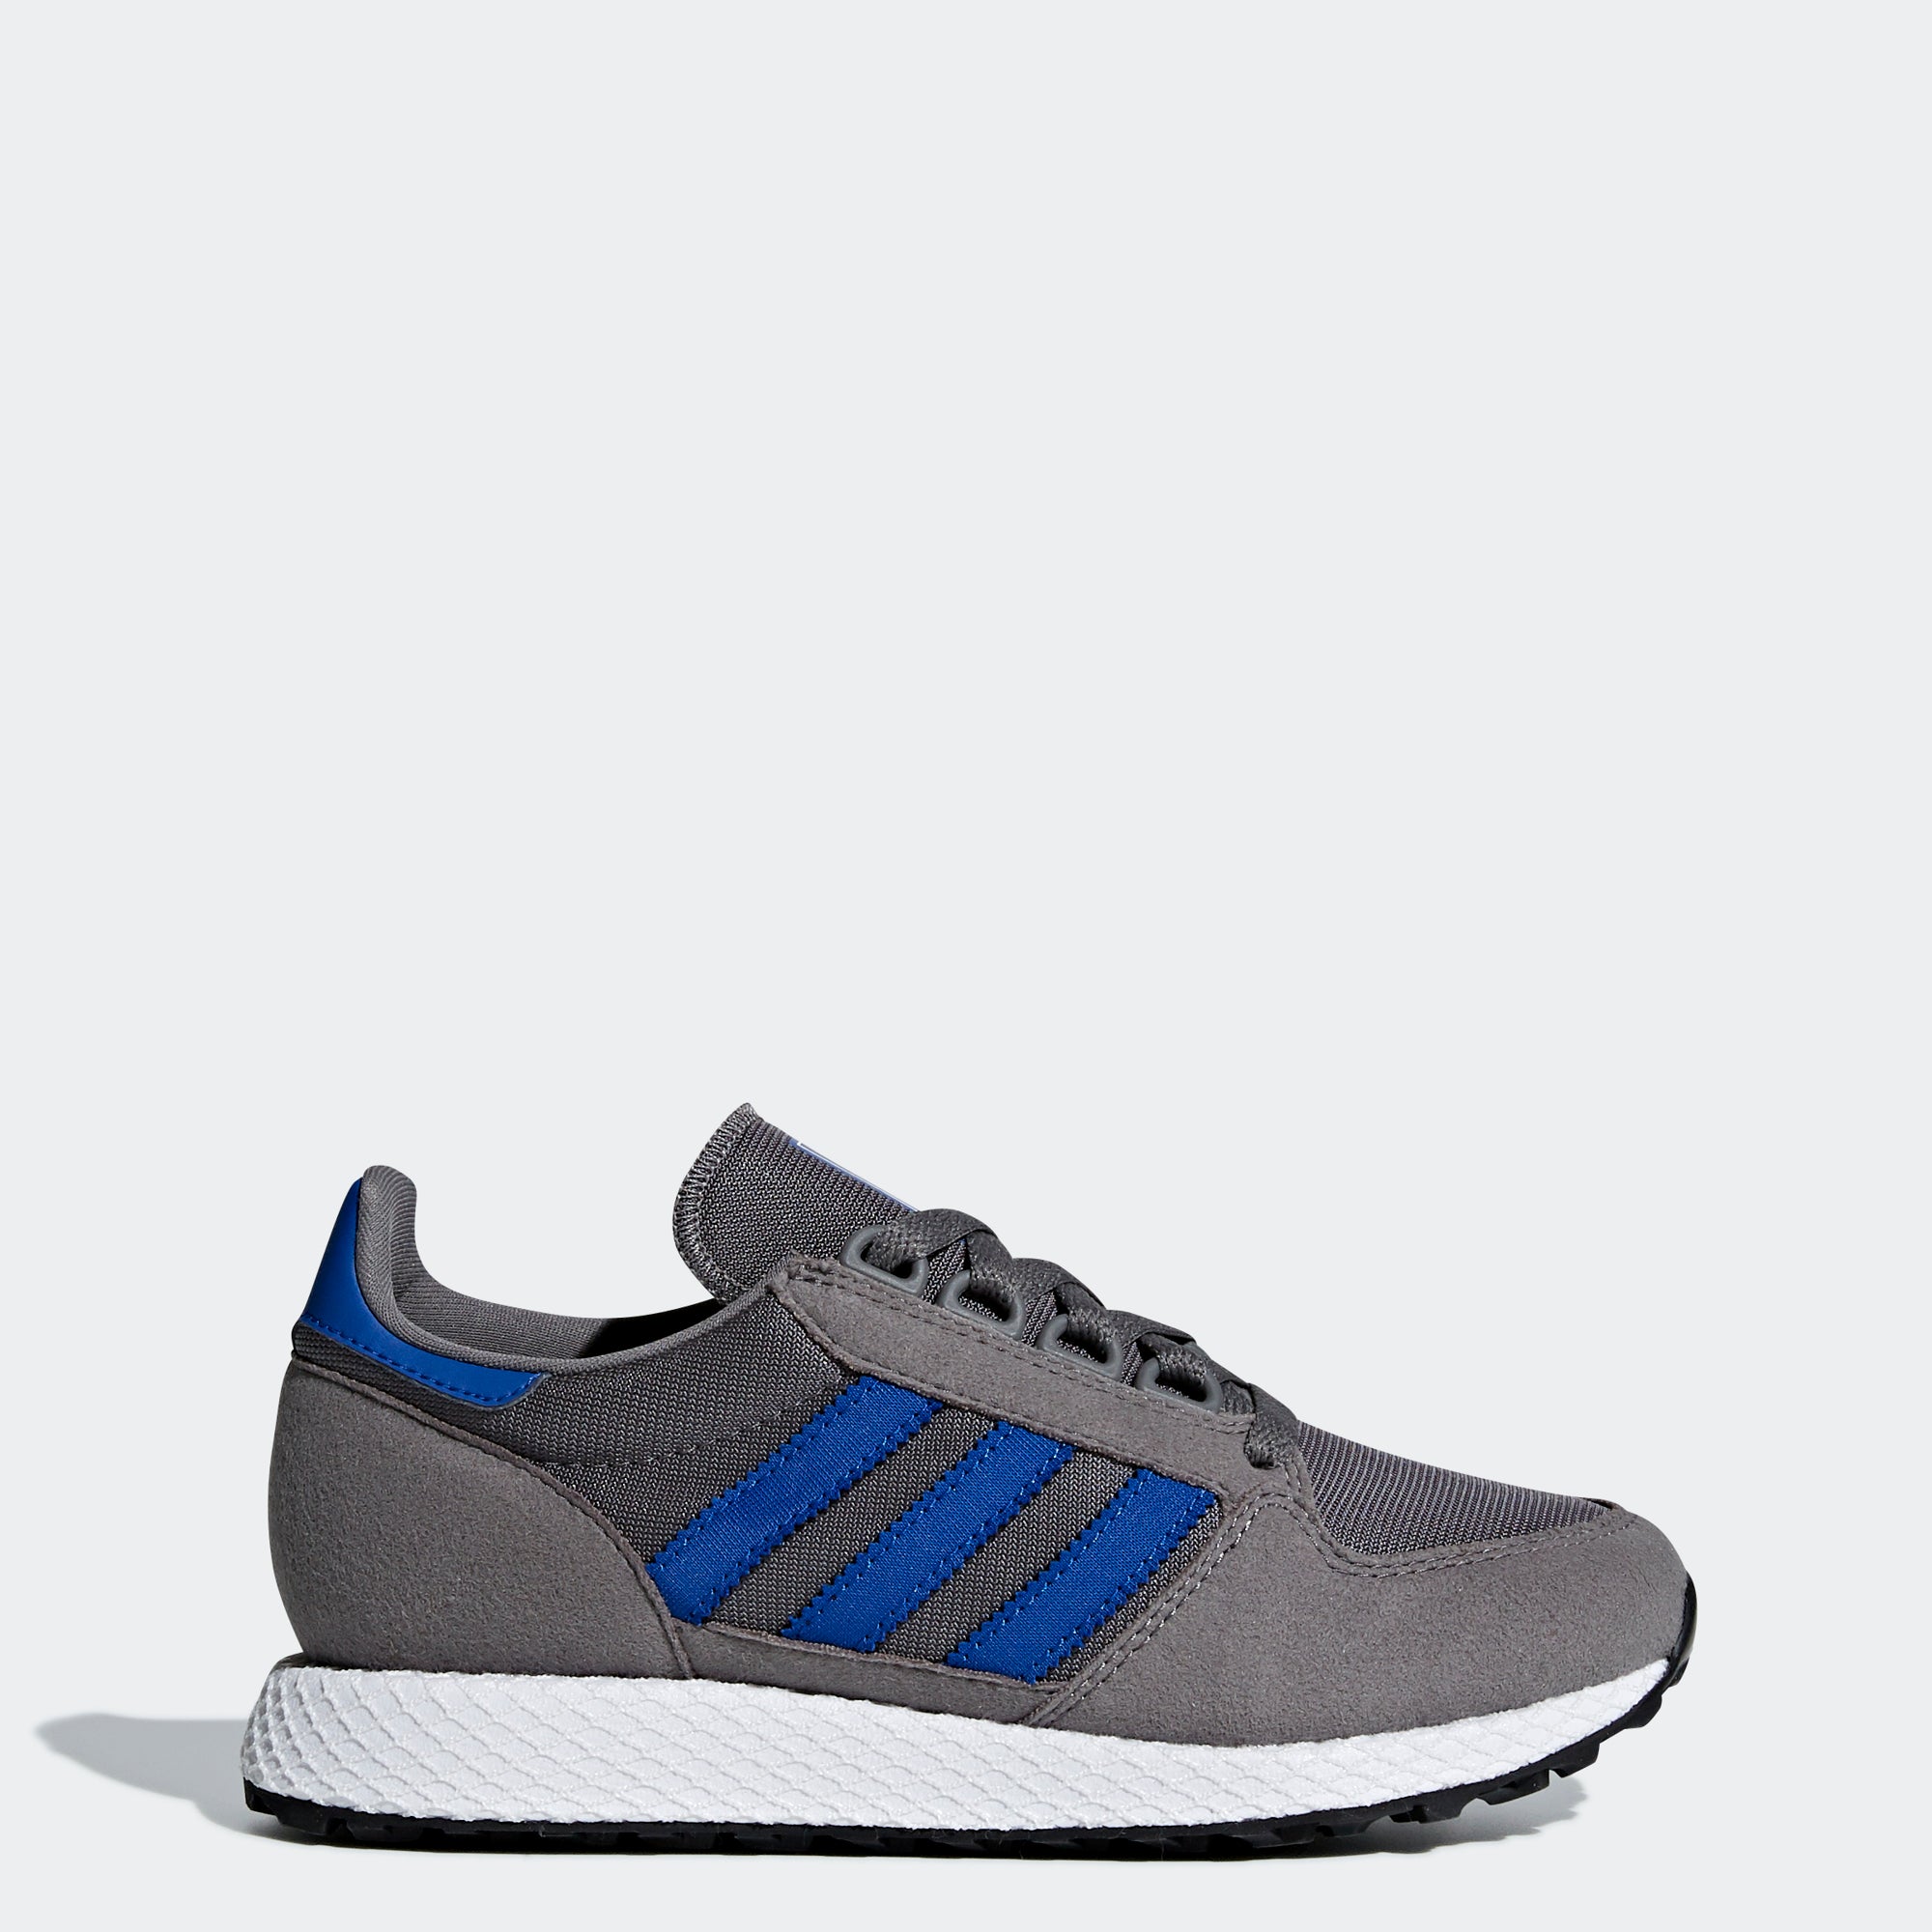 adidas forest grove kids